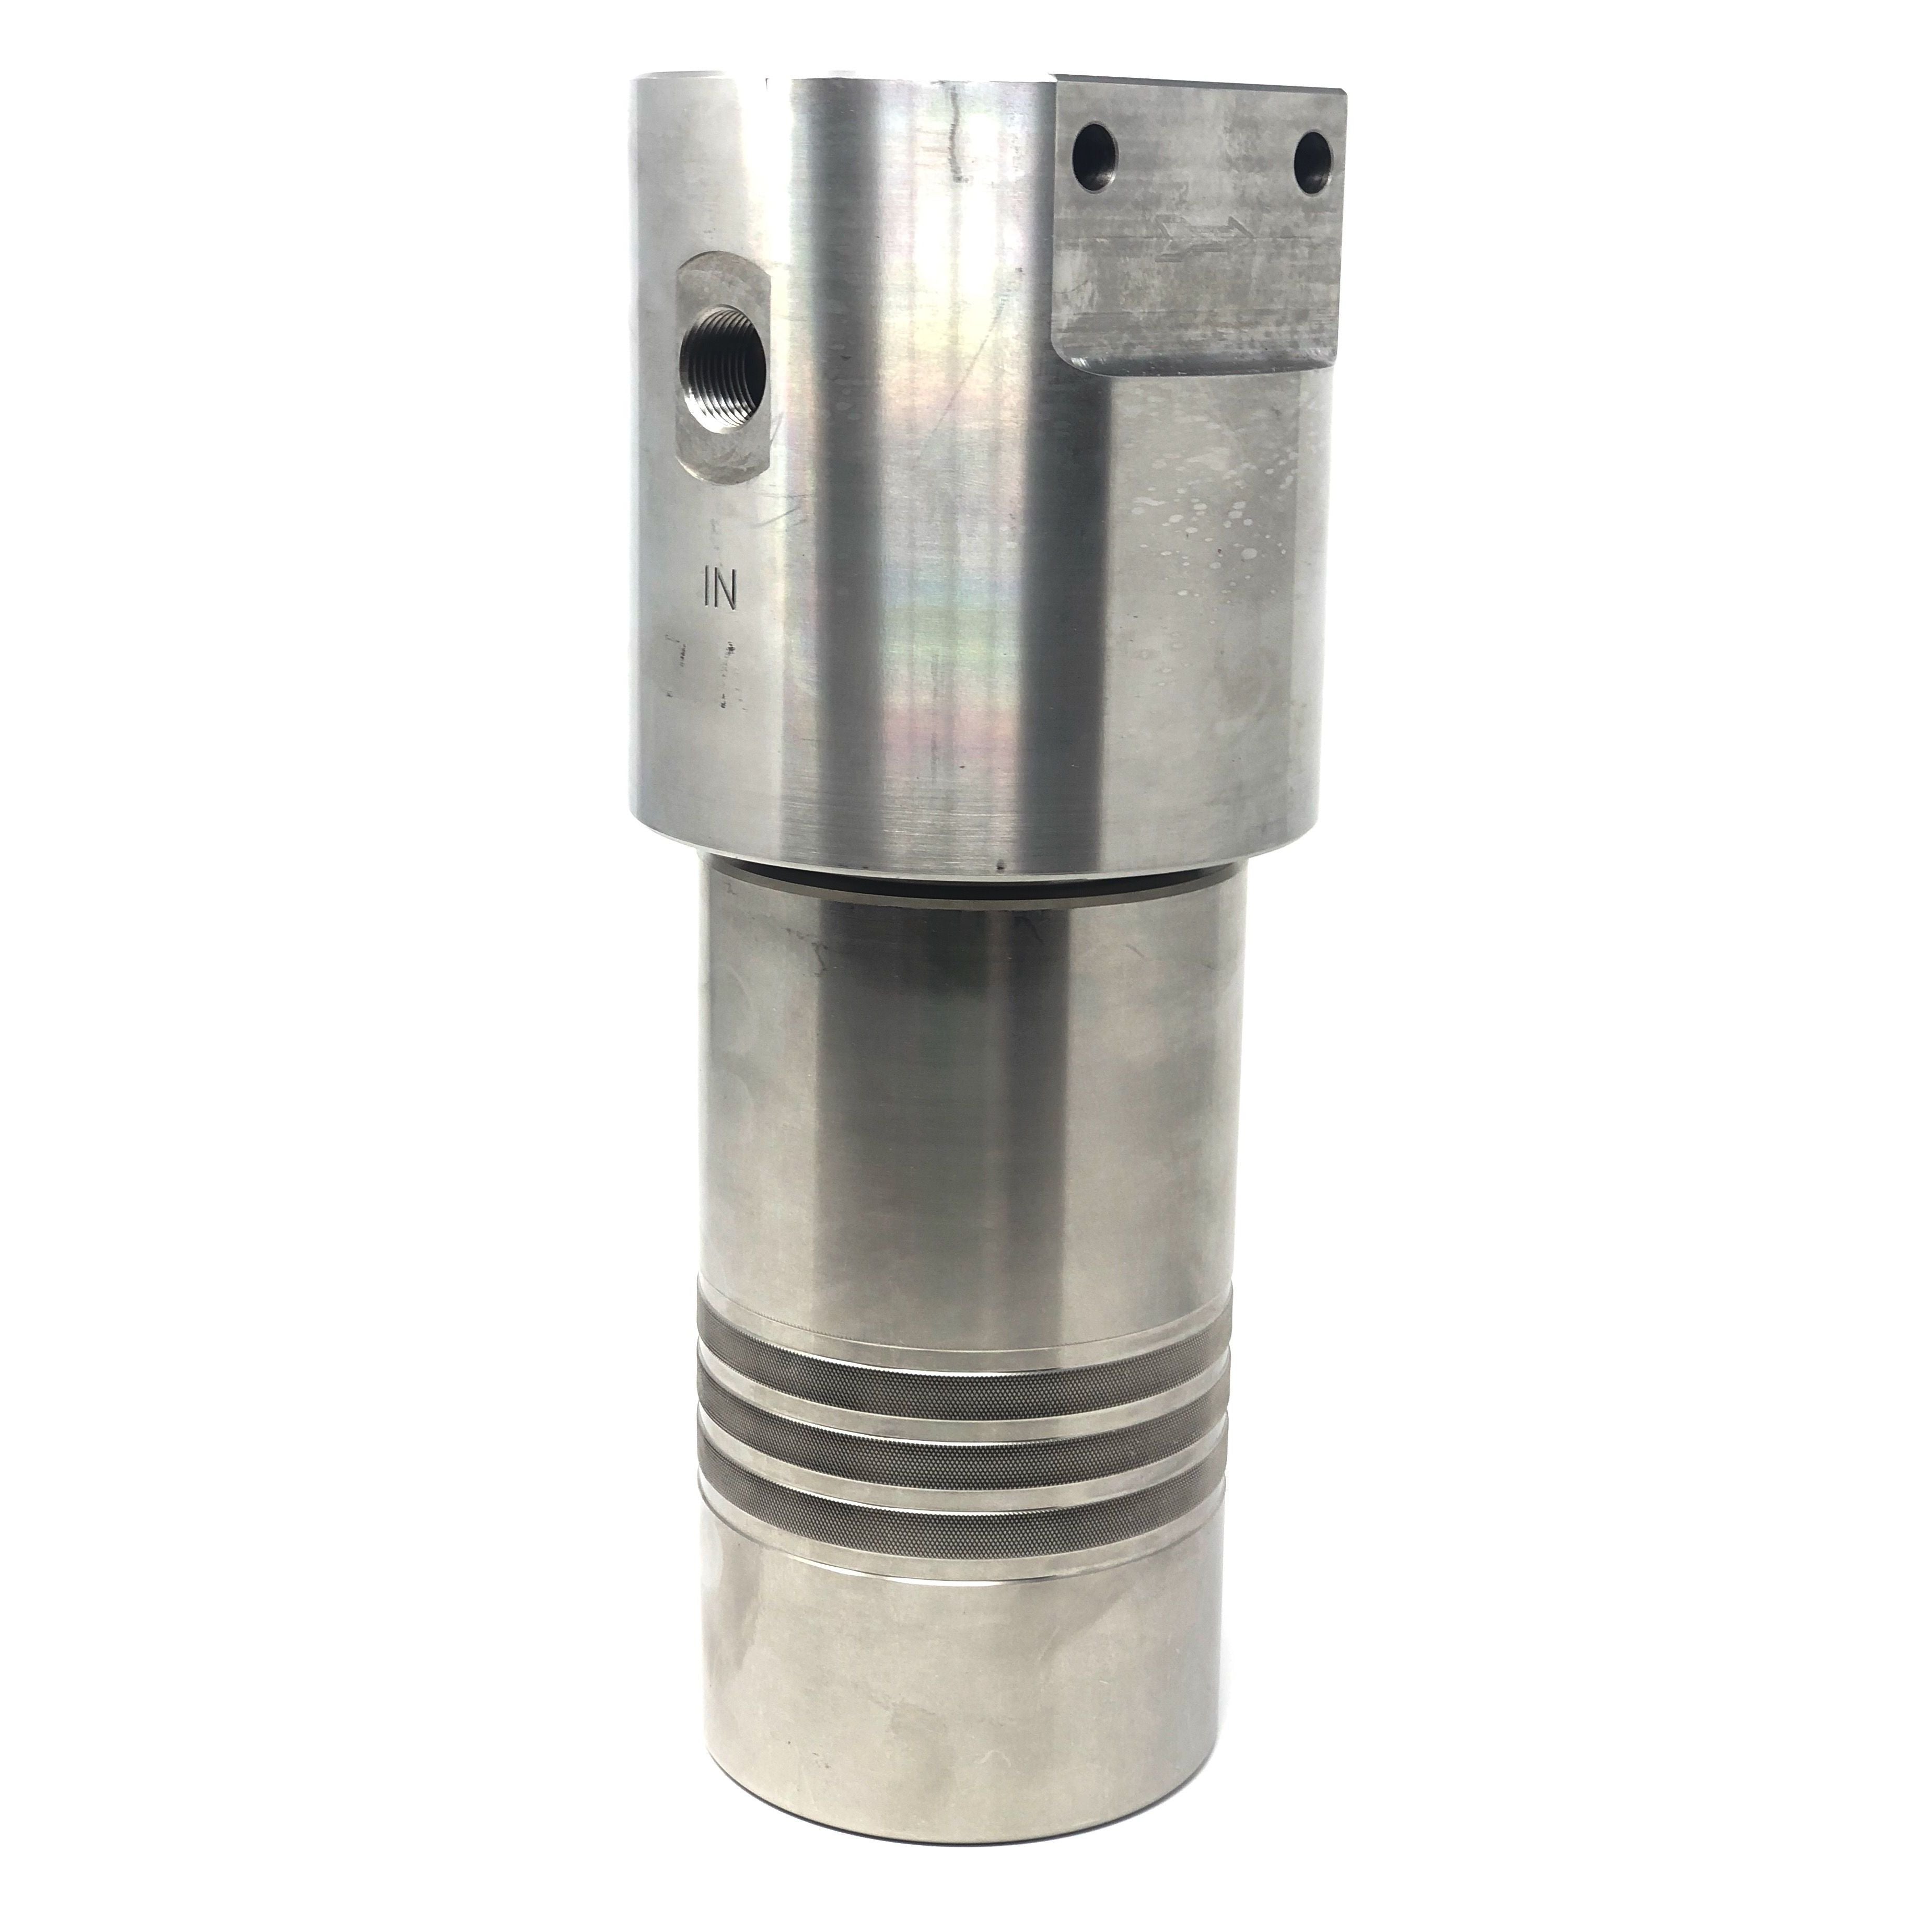 52S-246N-18SEN : Chase Ultra High Pressure Inline Filter, 10000psi, 3/8" NPT, 18 Micron, With Visual Indicator, No Bypass